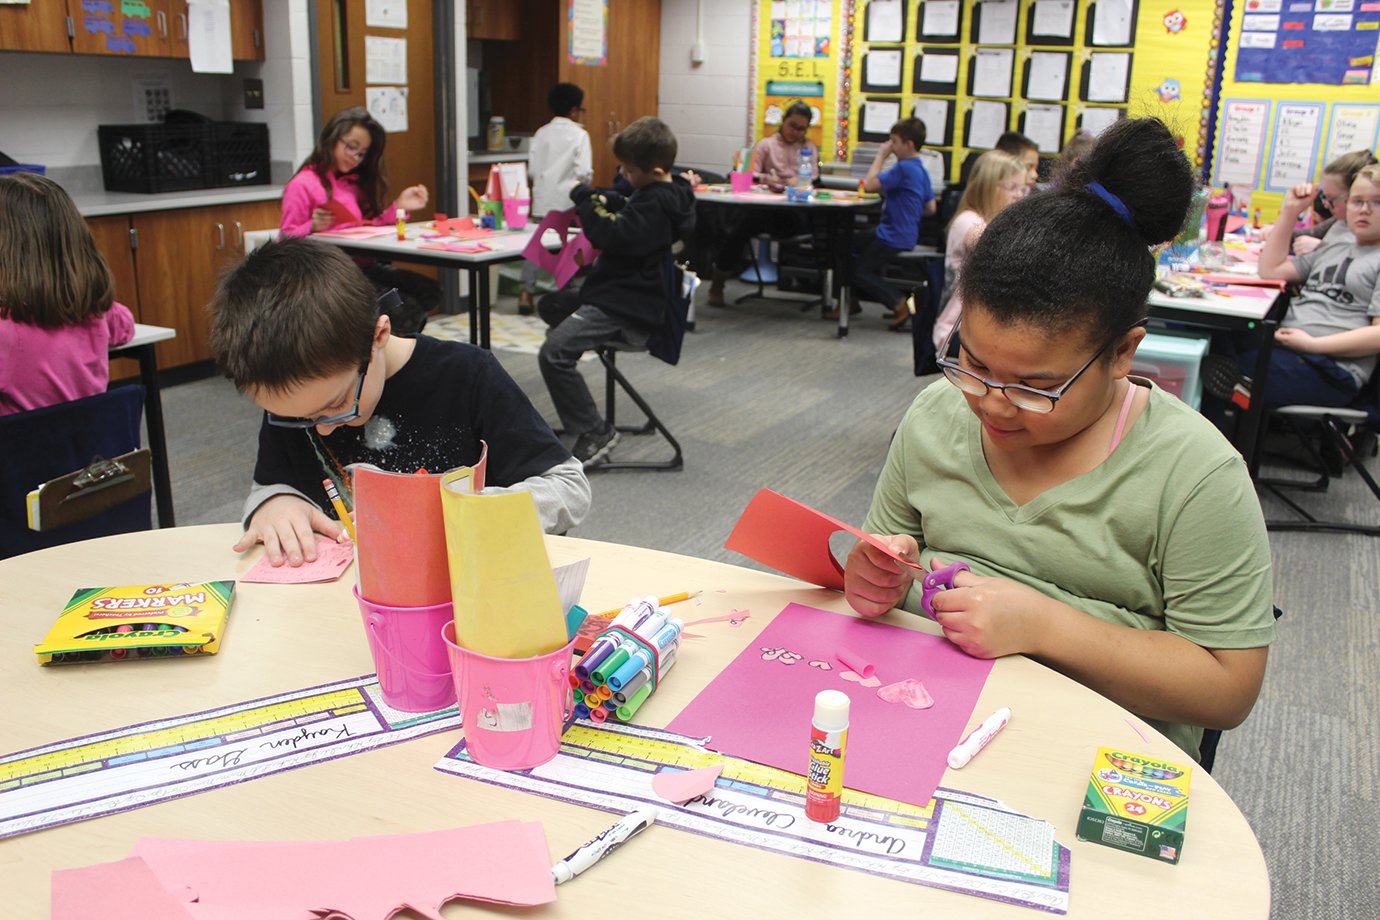 Nicholson third graders Kayden Gass, left, and Andrea Cleveland work together to make Valentine